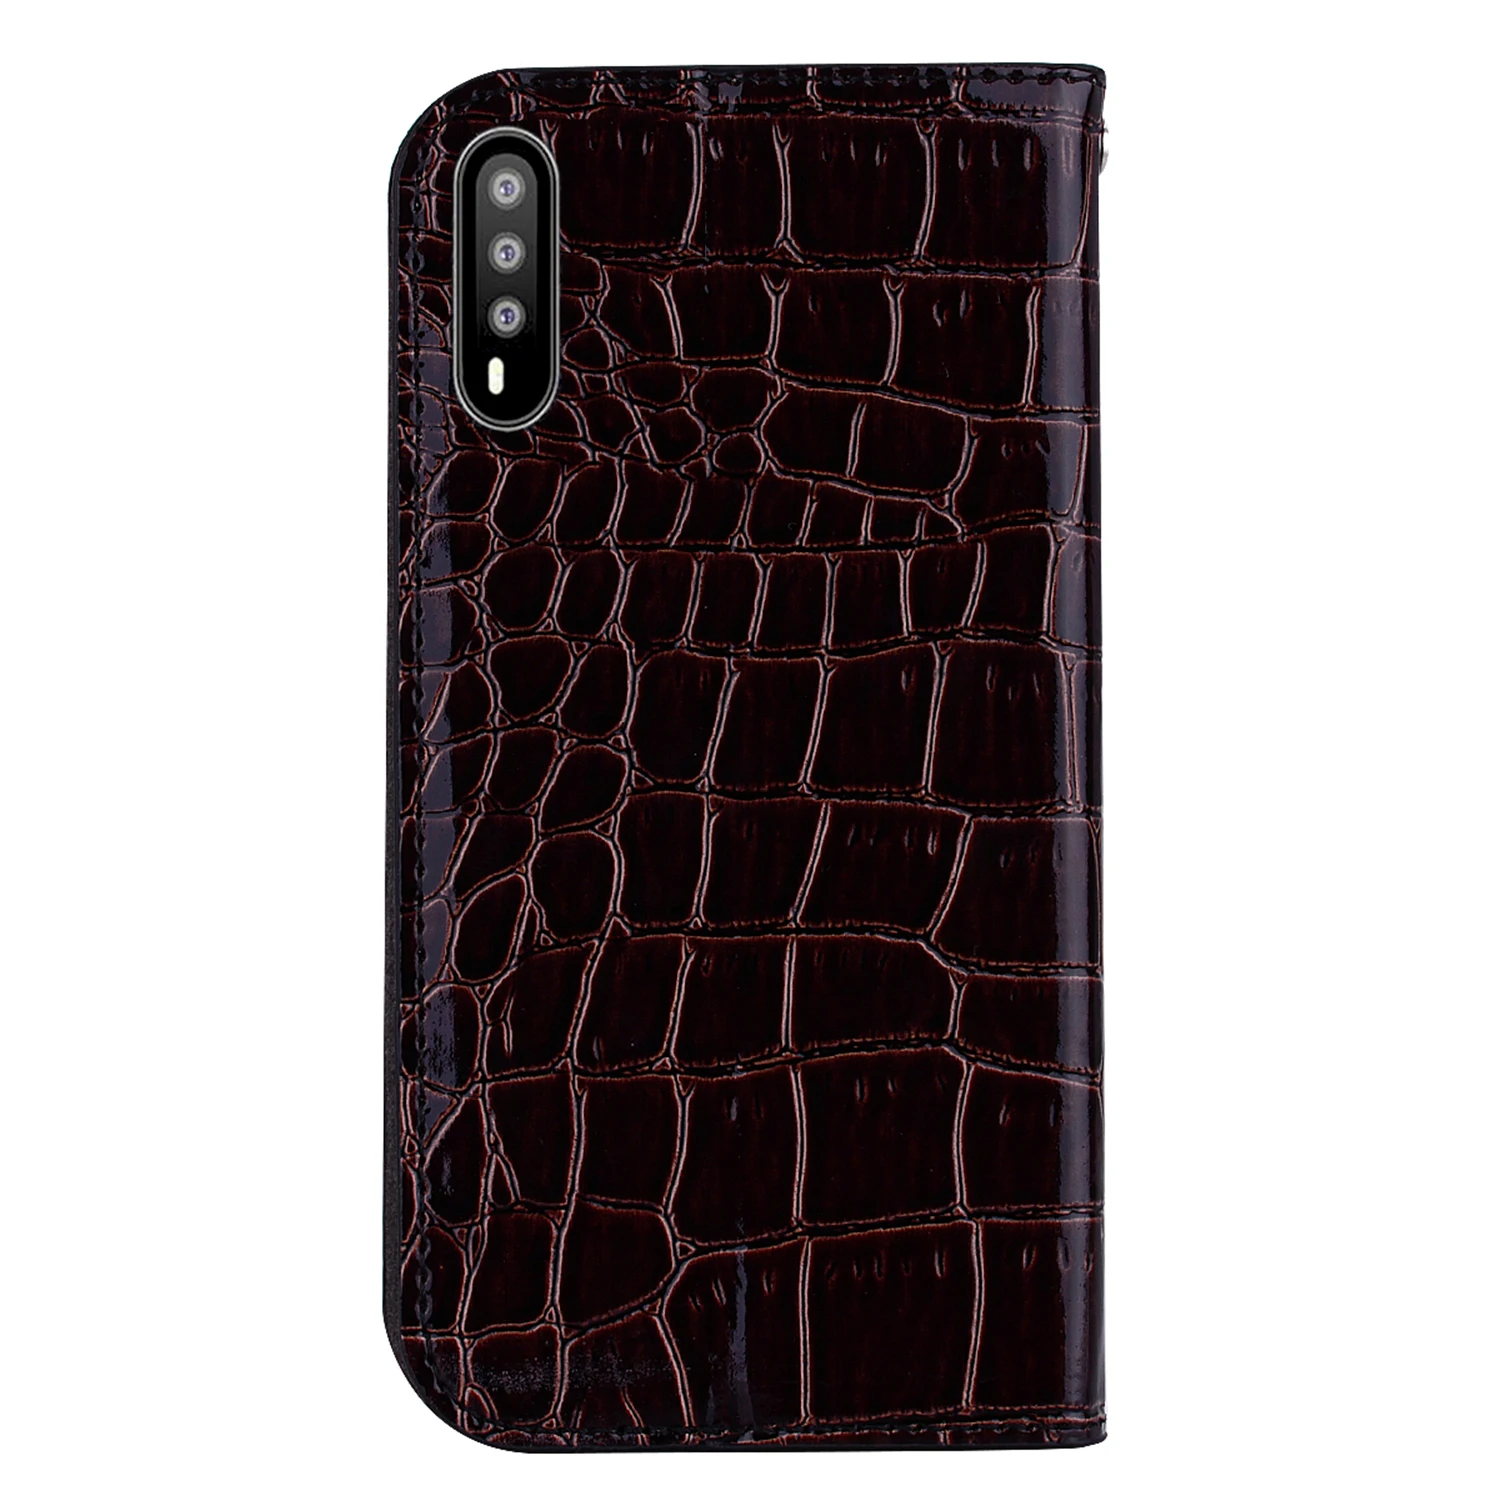 Glitter Bling Case For Huawei Mate 10 20 P20 P30 40 Lite Pro Honor 10 9 Lite Y6 Y7 Y9 P Smart 2019 Leather Funda Flip Book Coque